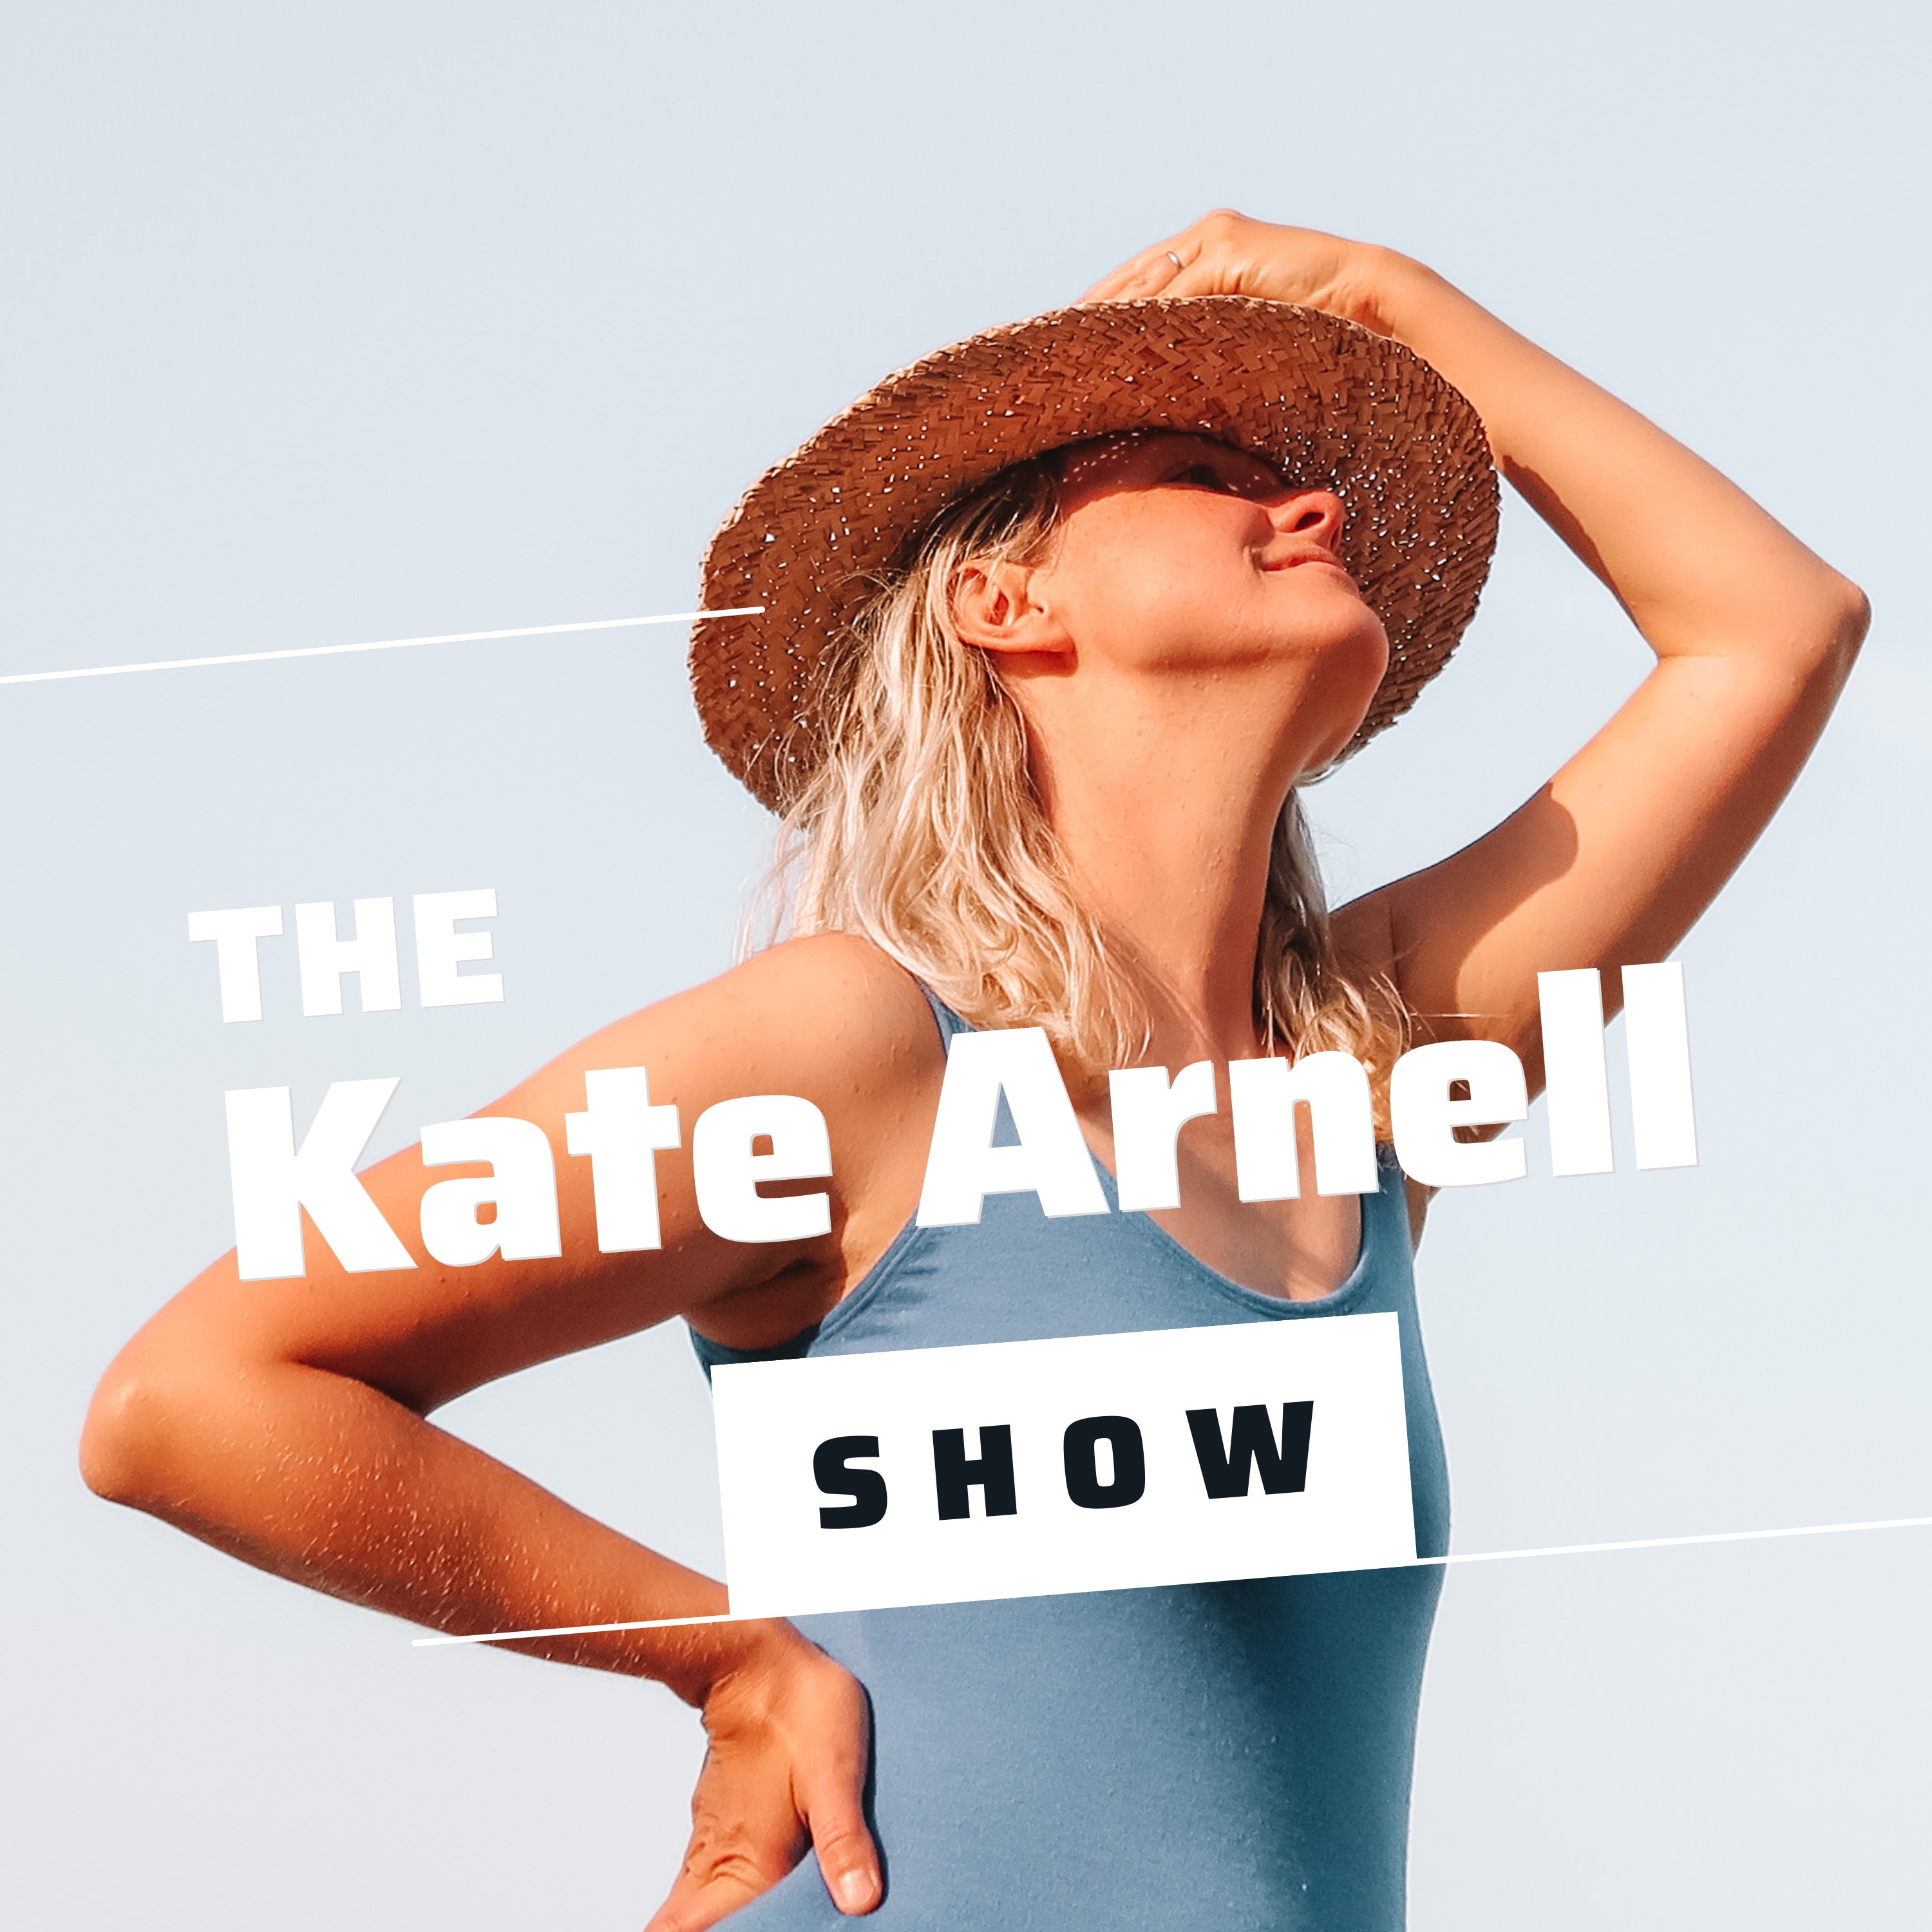 The Kate Arnell Show Image